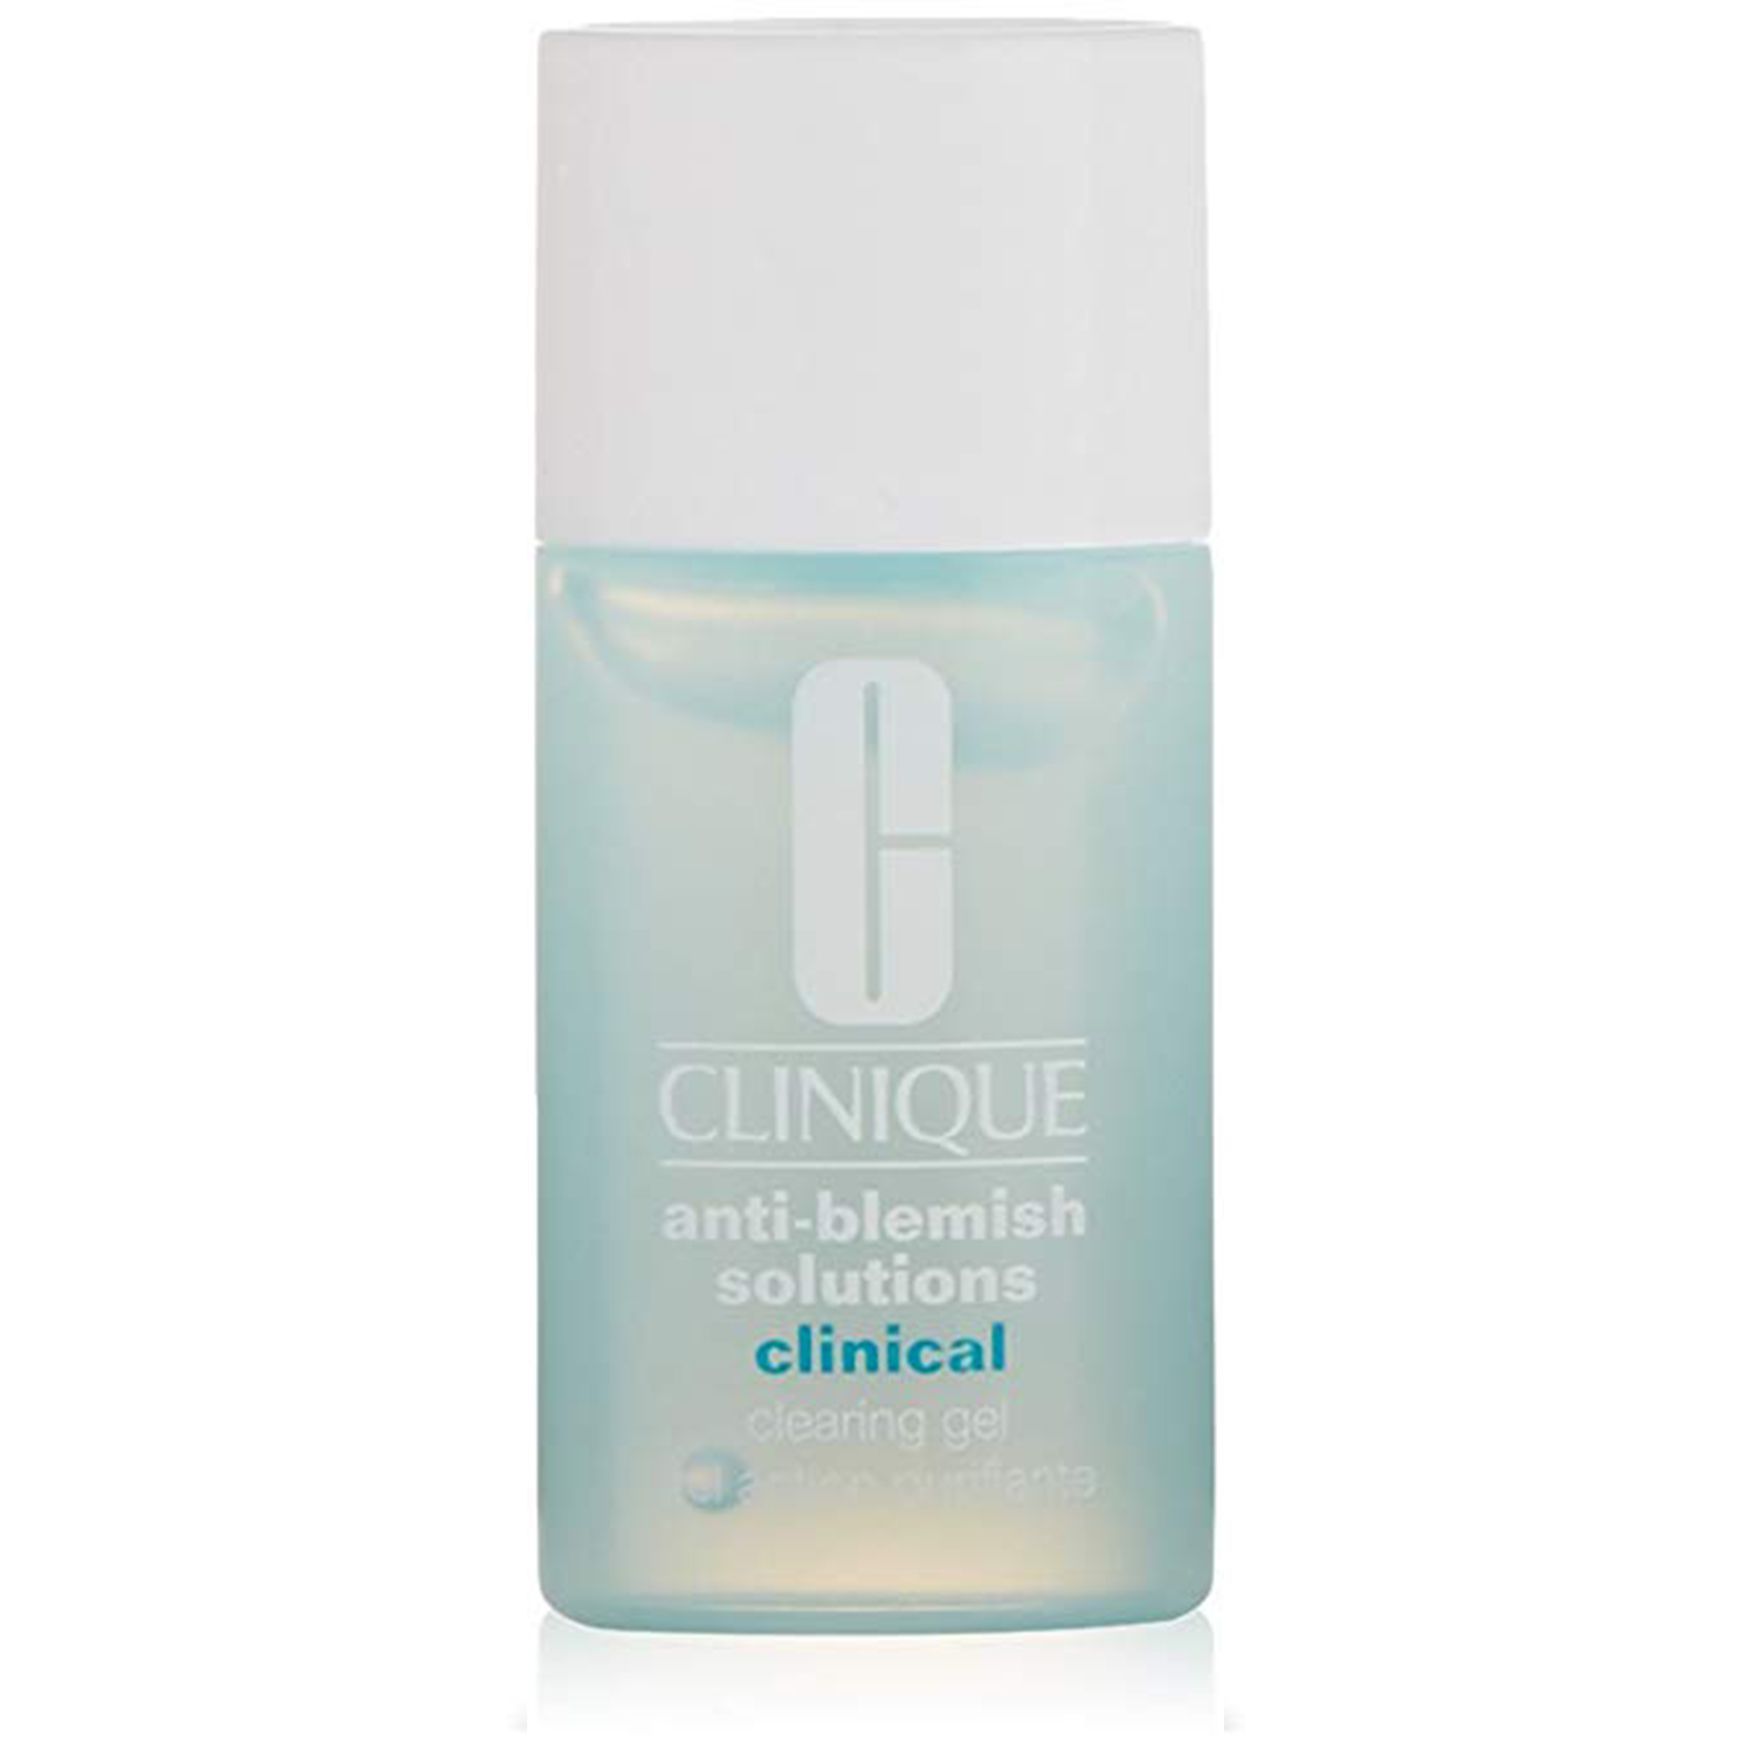 Clinique Acne Solutions Clinical Clearing Gel, Size 15ml